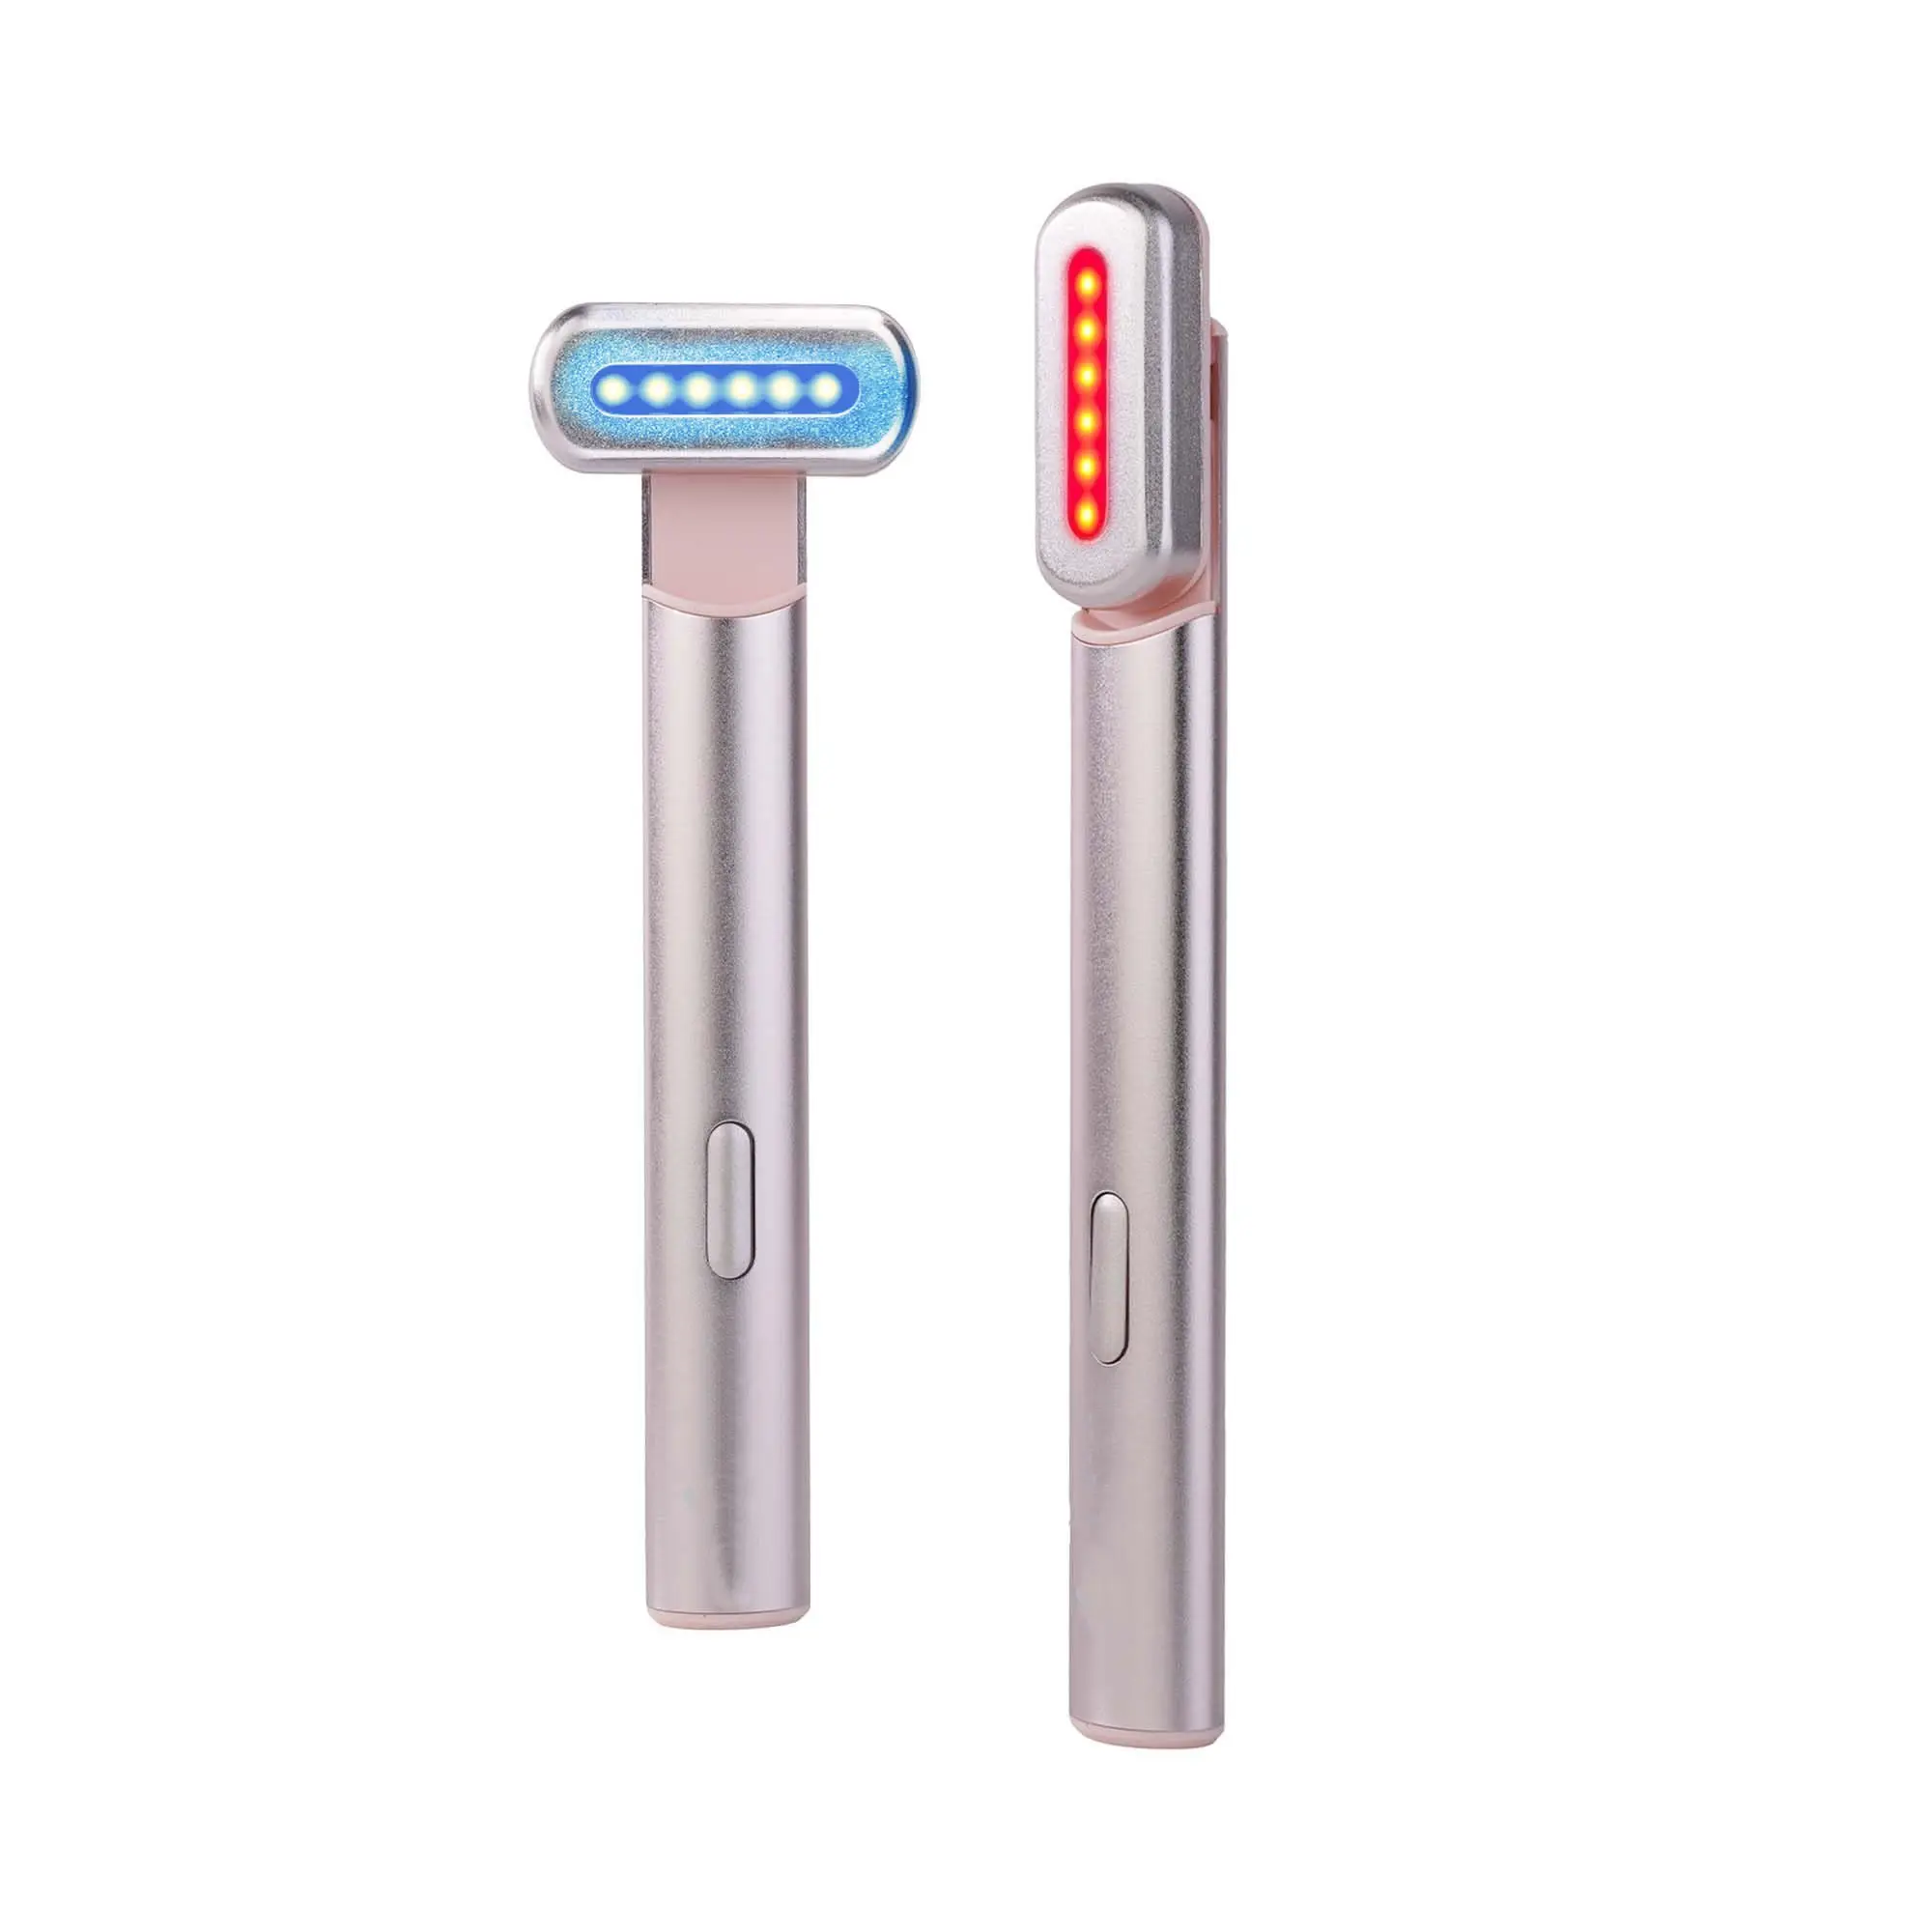 Neueste 4 In 1 Rot-und Blaulicht therapie Augen pflege Ems Mikros trom Hot Com press Led Facial Sonic Vib rating Skincare Wand